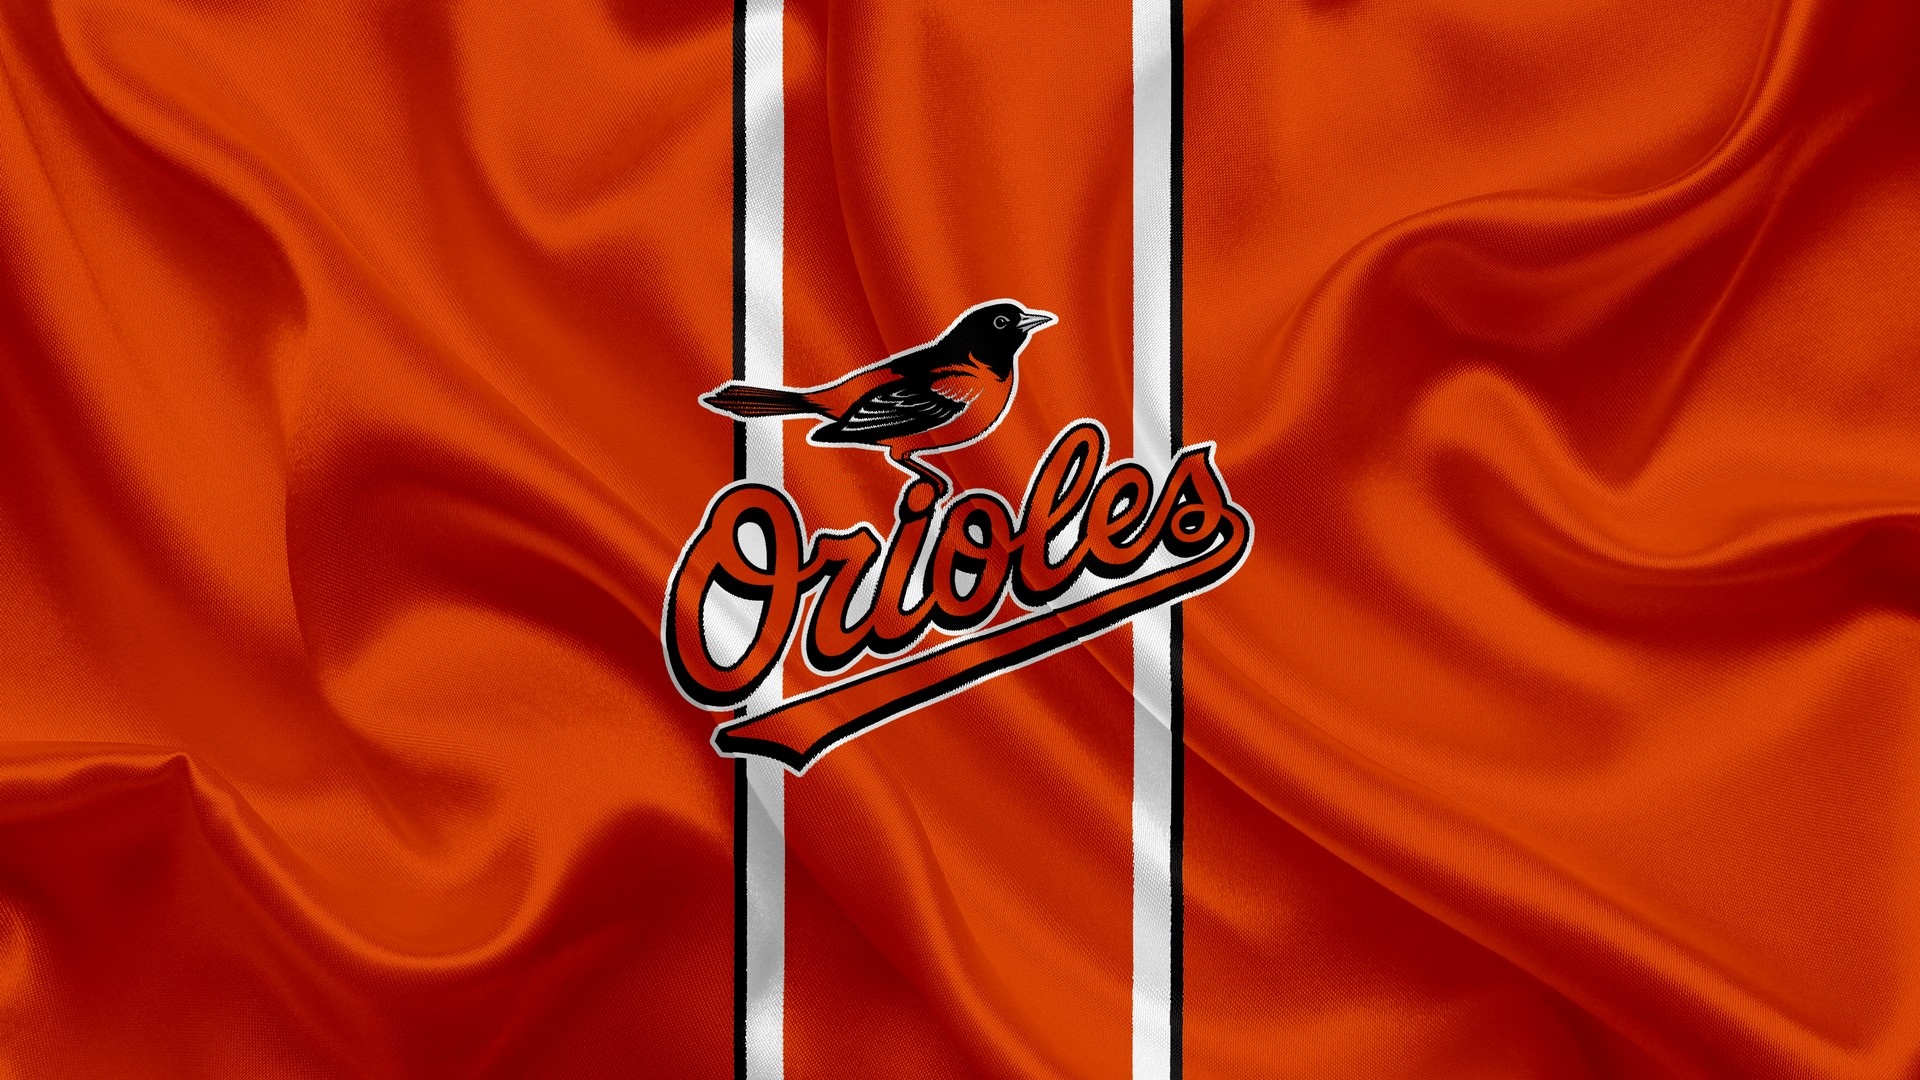 HD Desktop Wallpaper Baltimore Orioles With high-resolution 1920X1080 pixel. You can use this wallpaper for Mac Desktop Wallpaper, Laptop Screensavers, Android Wallpapers, Tablet or iPhone Home Screen and another mobile phone device